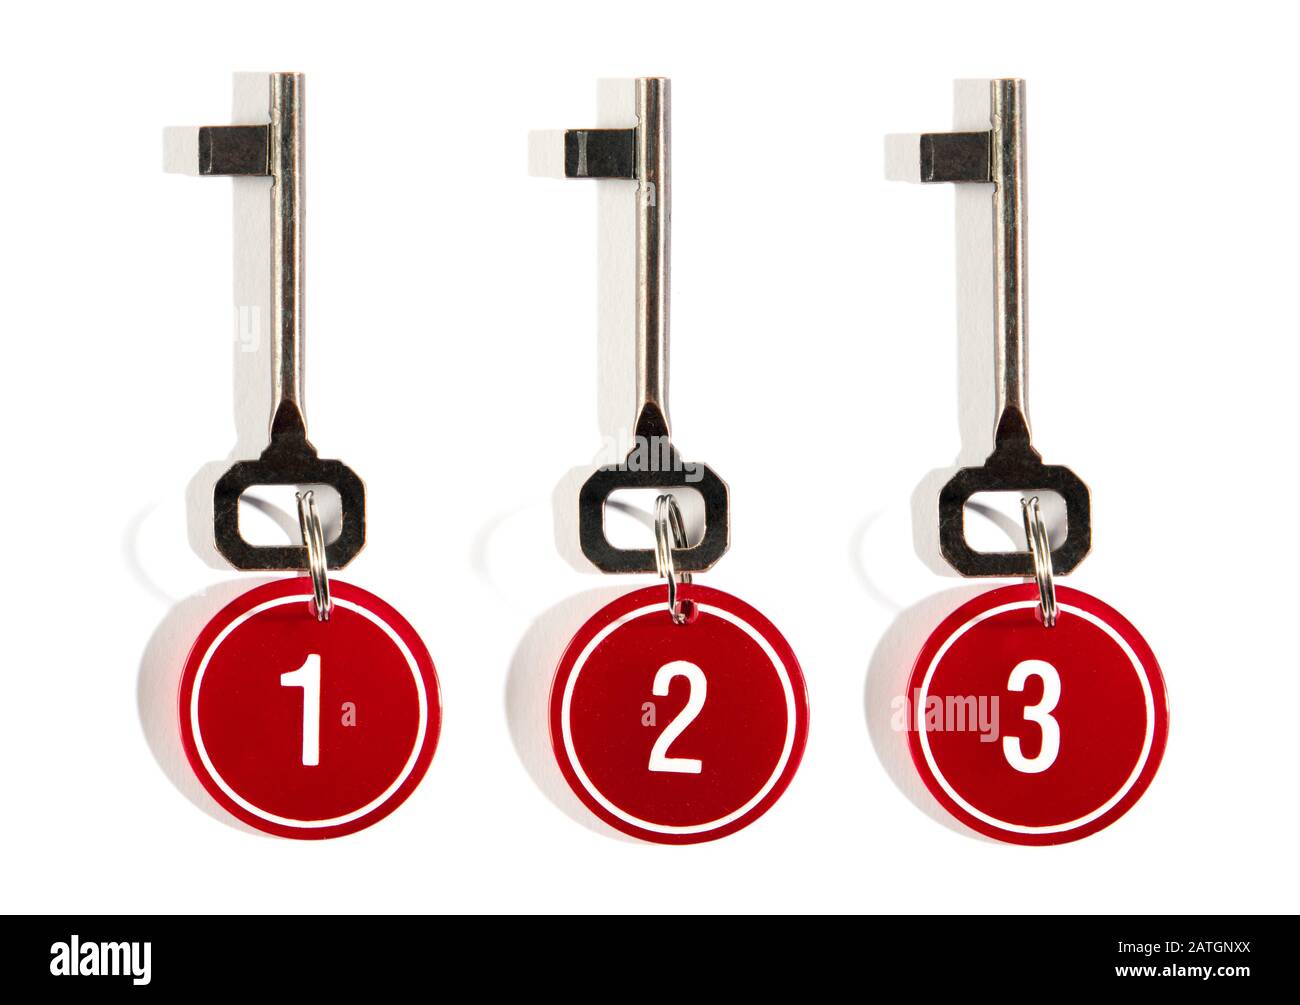 Three matching keys with red numbers on circular key tags on rings arranged in a row on white with shadow Stock Photo